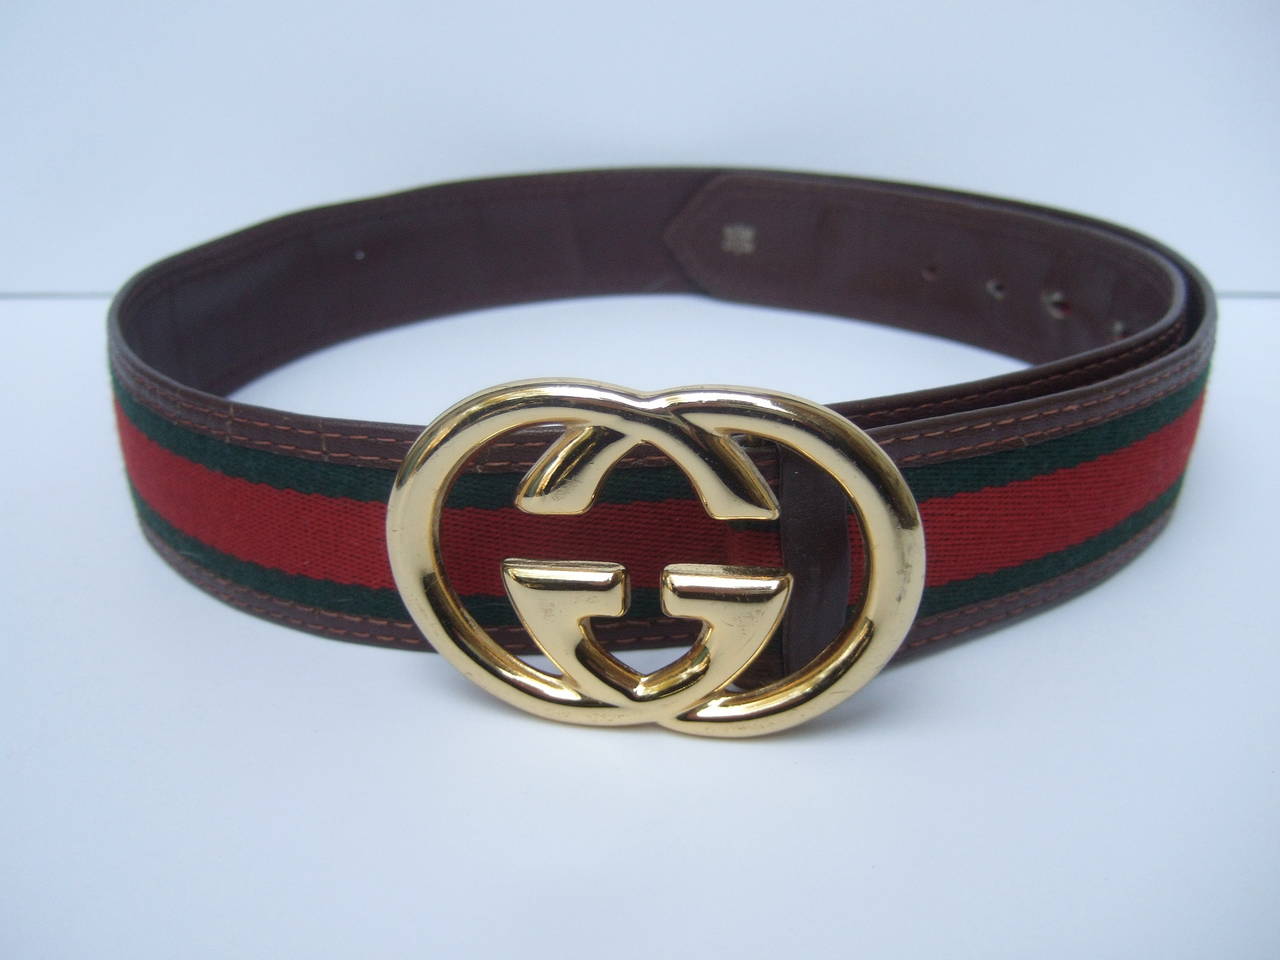 Gucci Sleek Gilt Buckle Red and Green Striped Belt c 1980s at 1stdibs